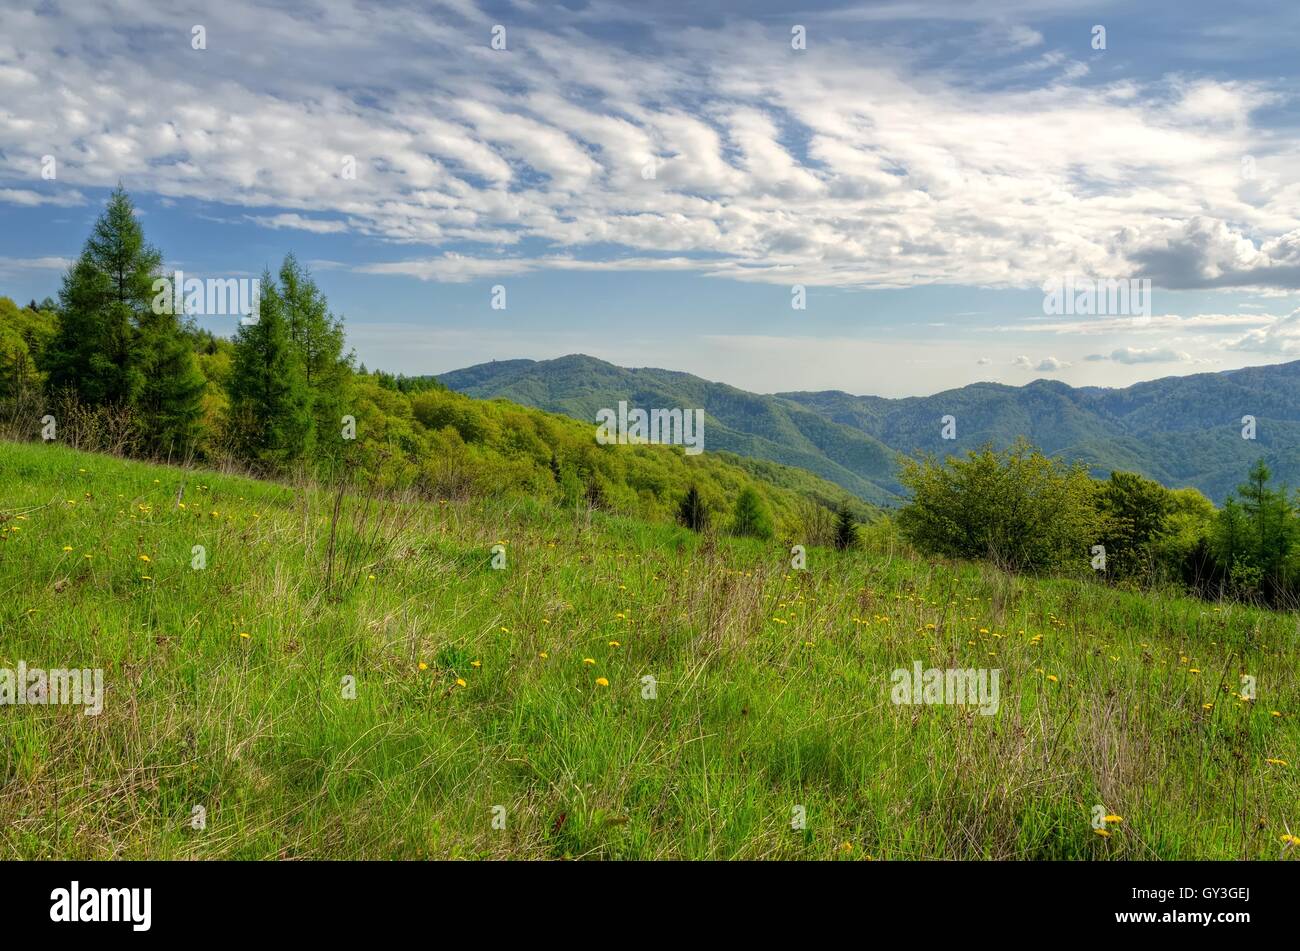 Spring mountain landscape. Green meadow and forested hills. Stock Photo